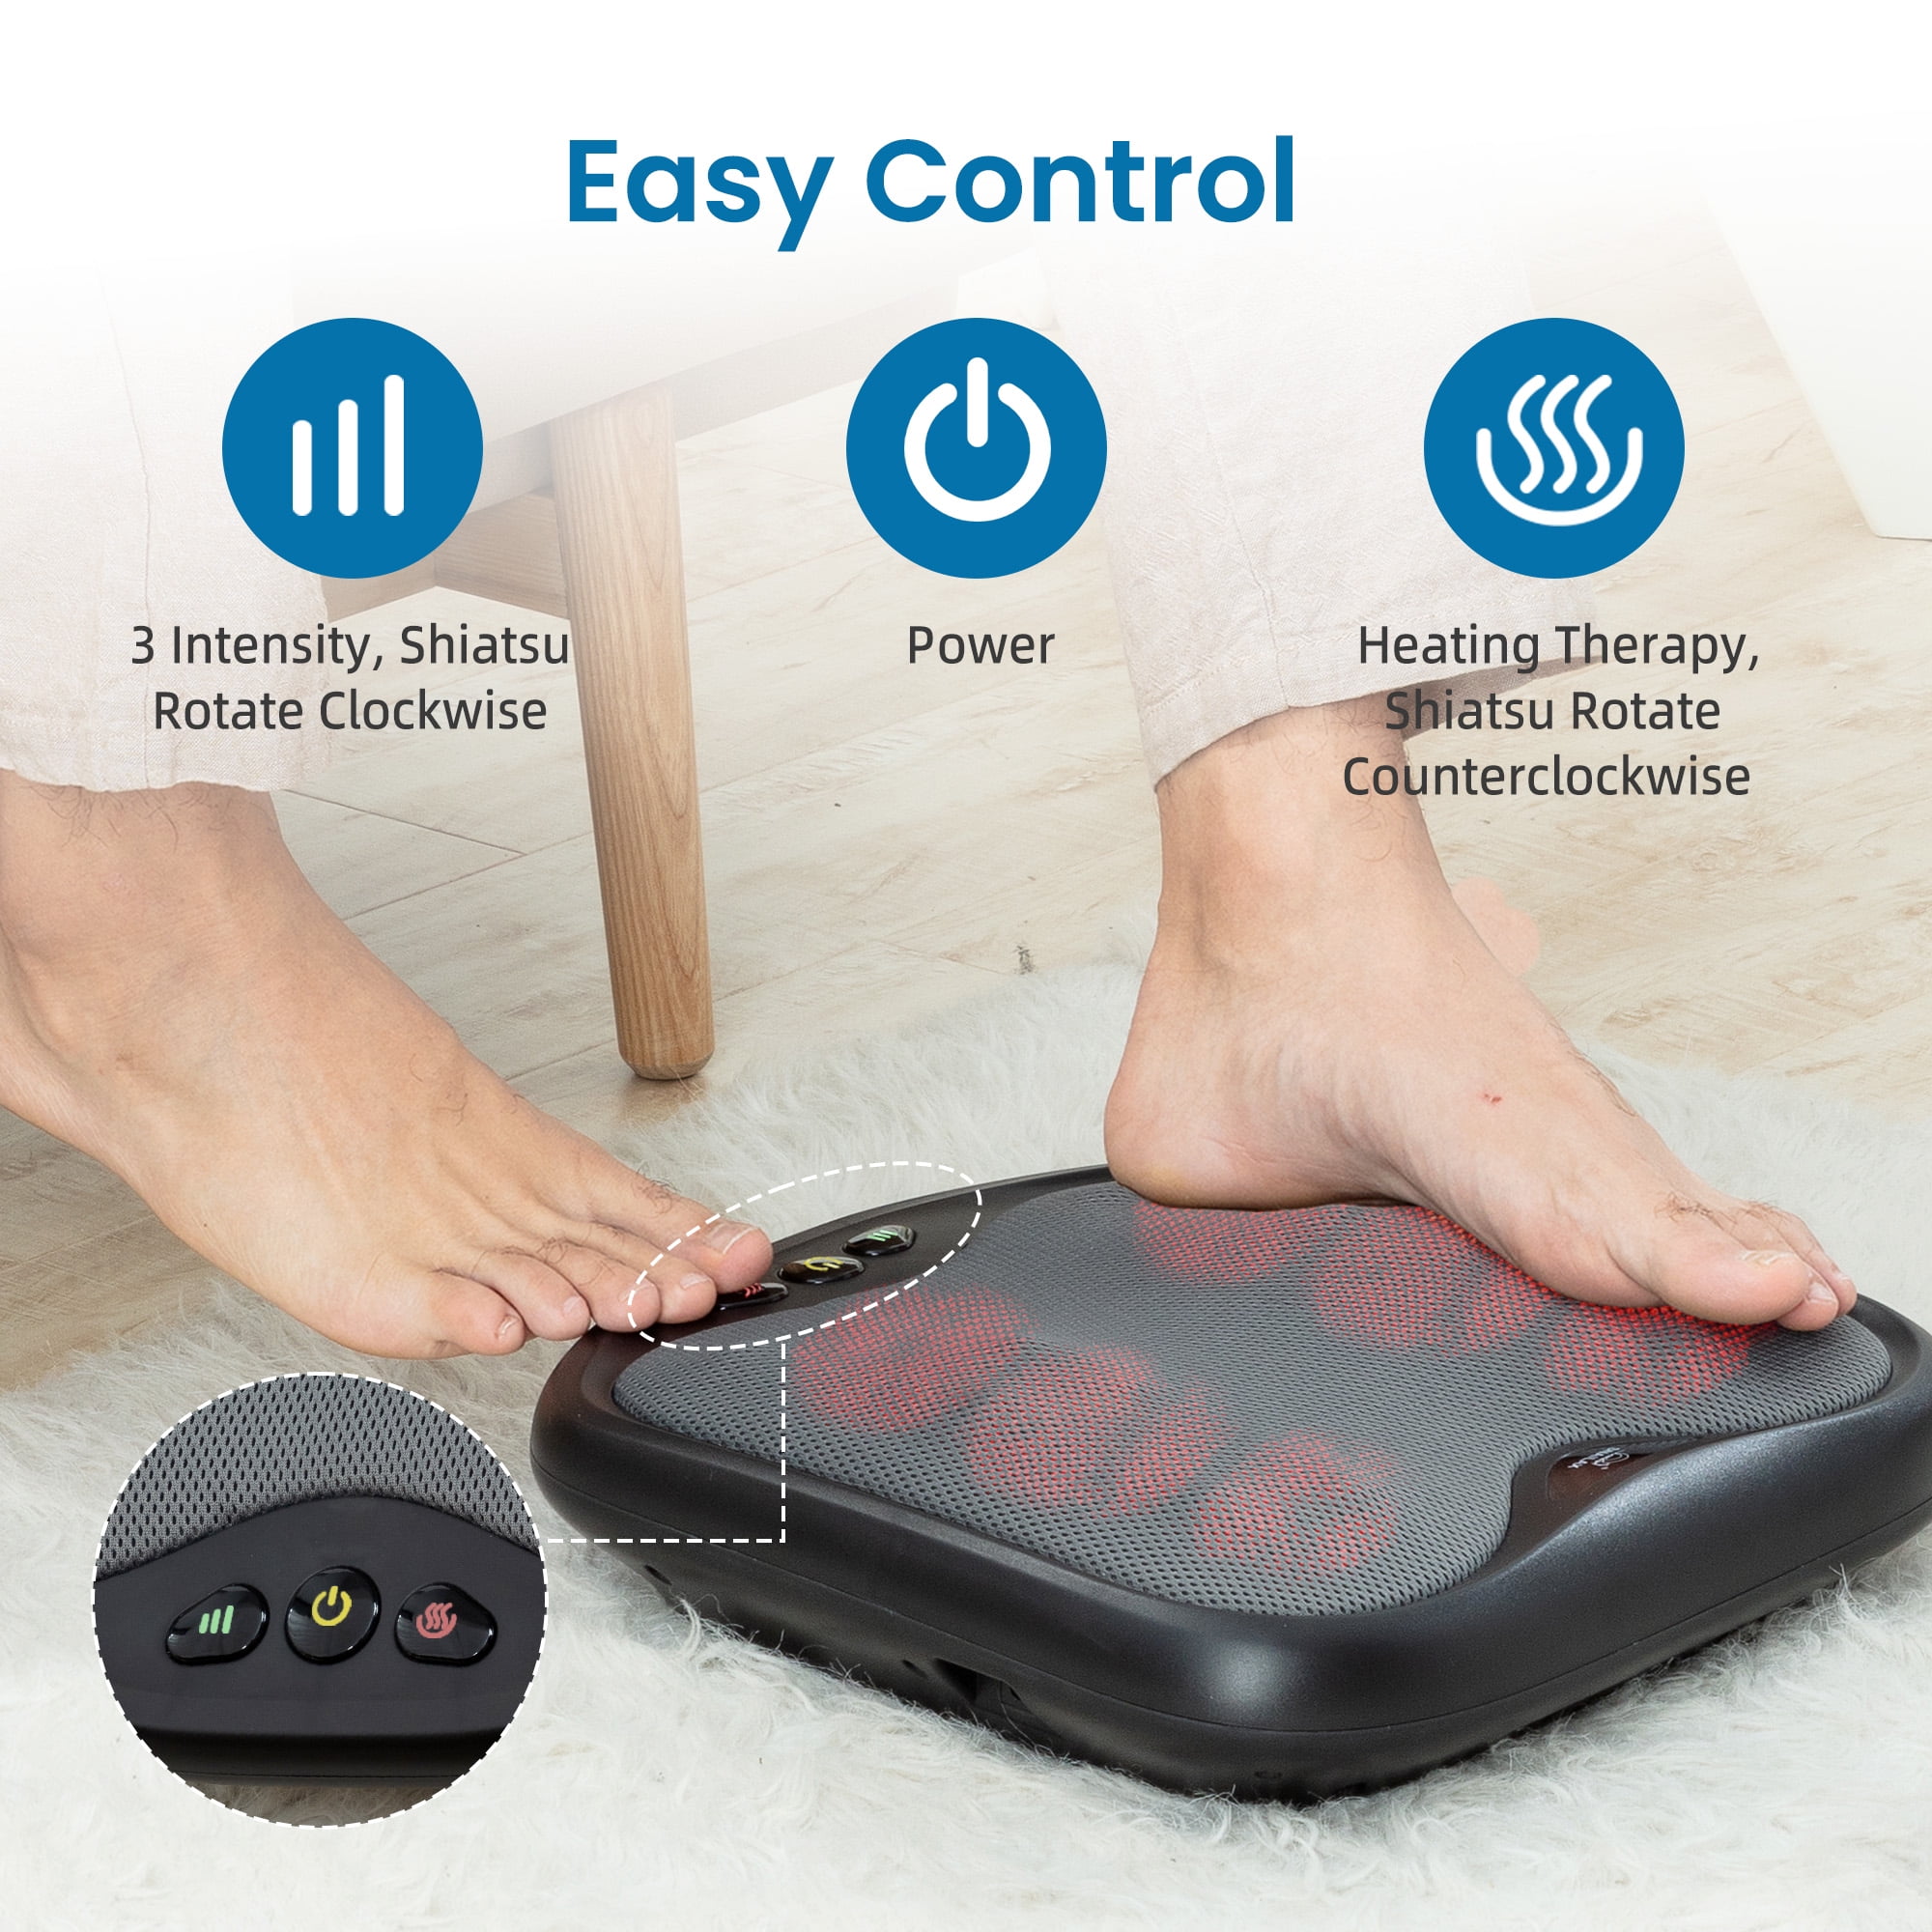 Snailax 3-in-1 Foot Warmer and Vibration Foot Massager & Back Massager with  Heat,Fast Heating Pad & …See more Snailax 3-in-1 Foot Warmer and Vibration